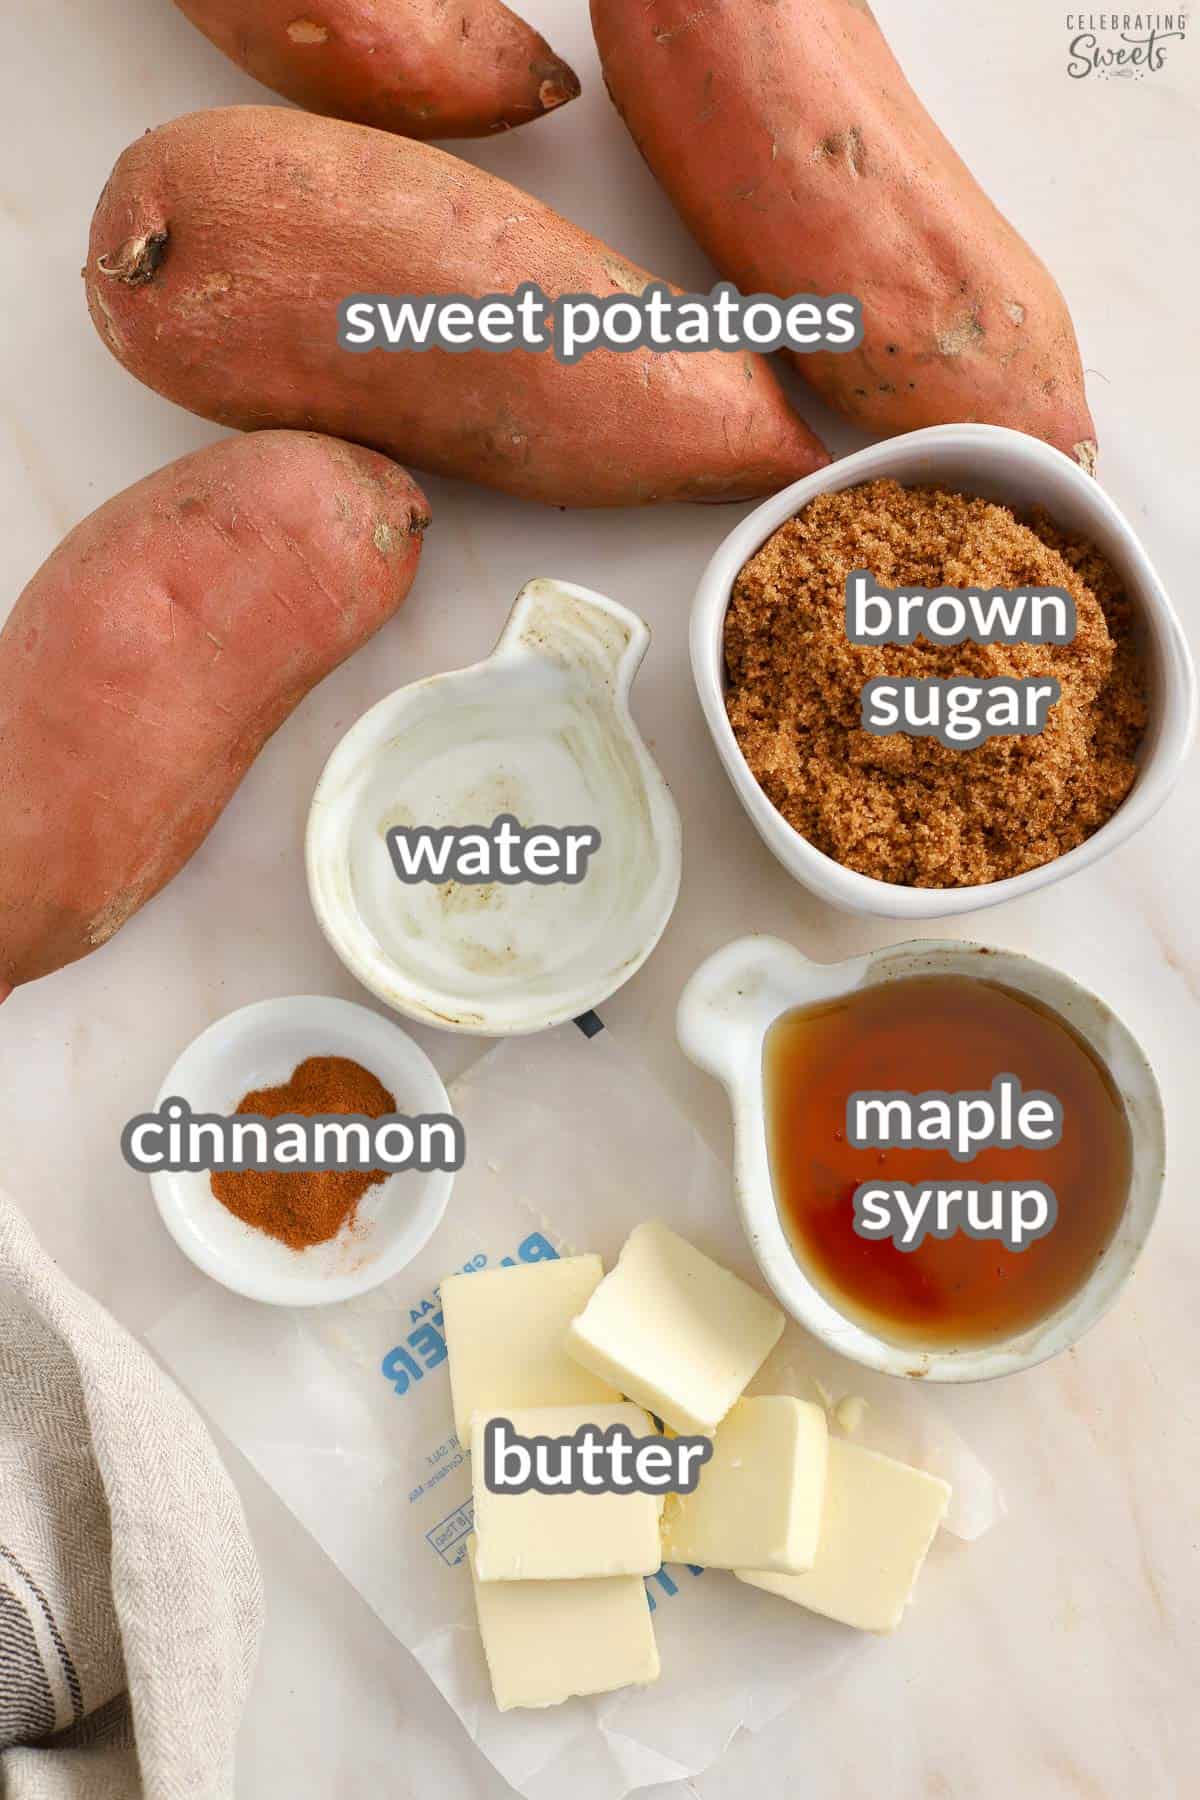 Ingredients for candied sweet potatoes: sweet potatoes, butter, brown sugar, cinnamon, syrup, water.